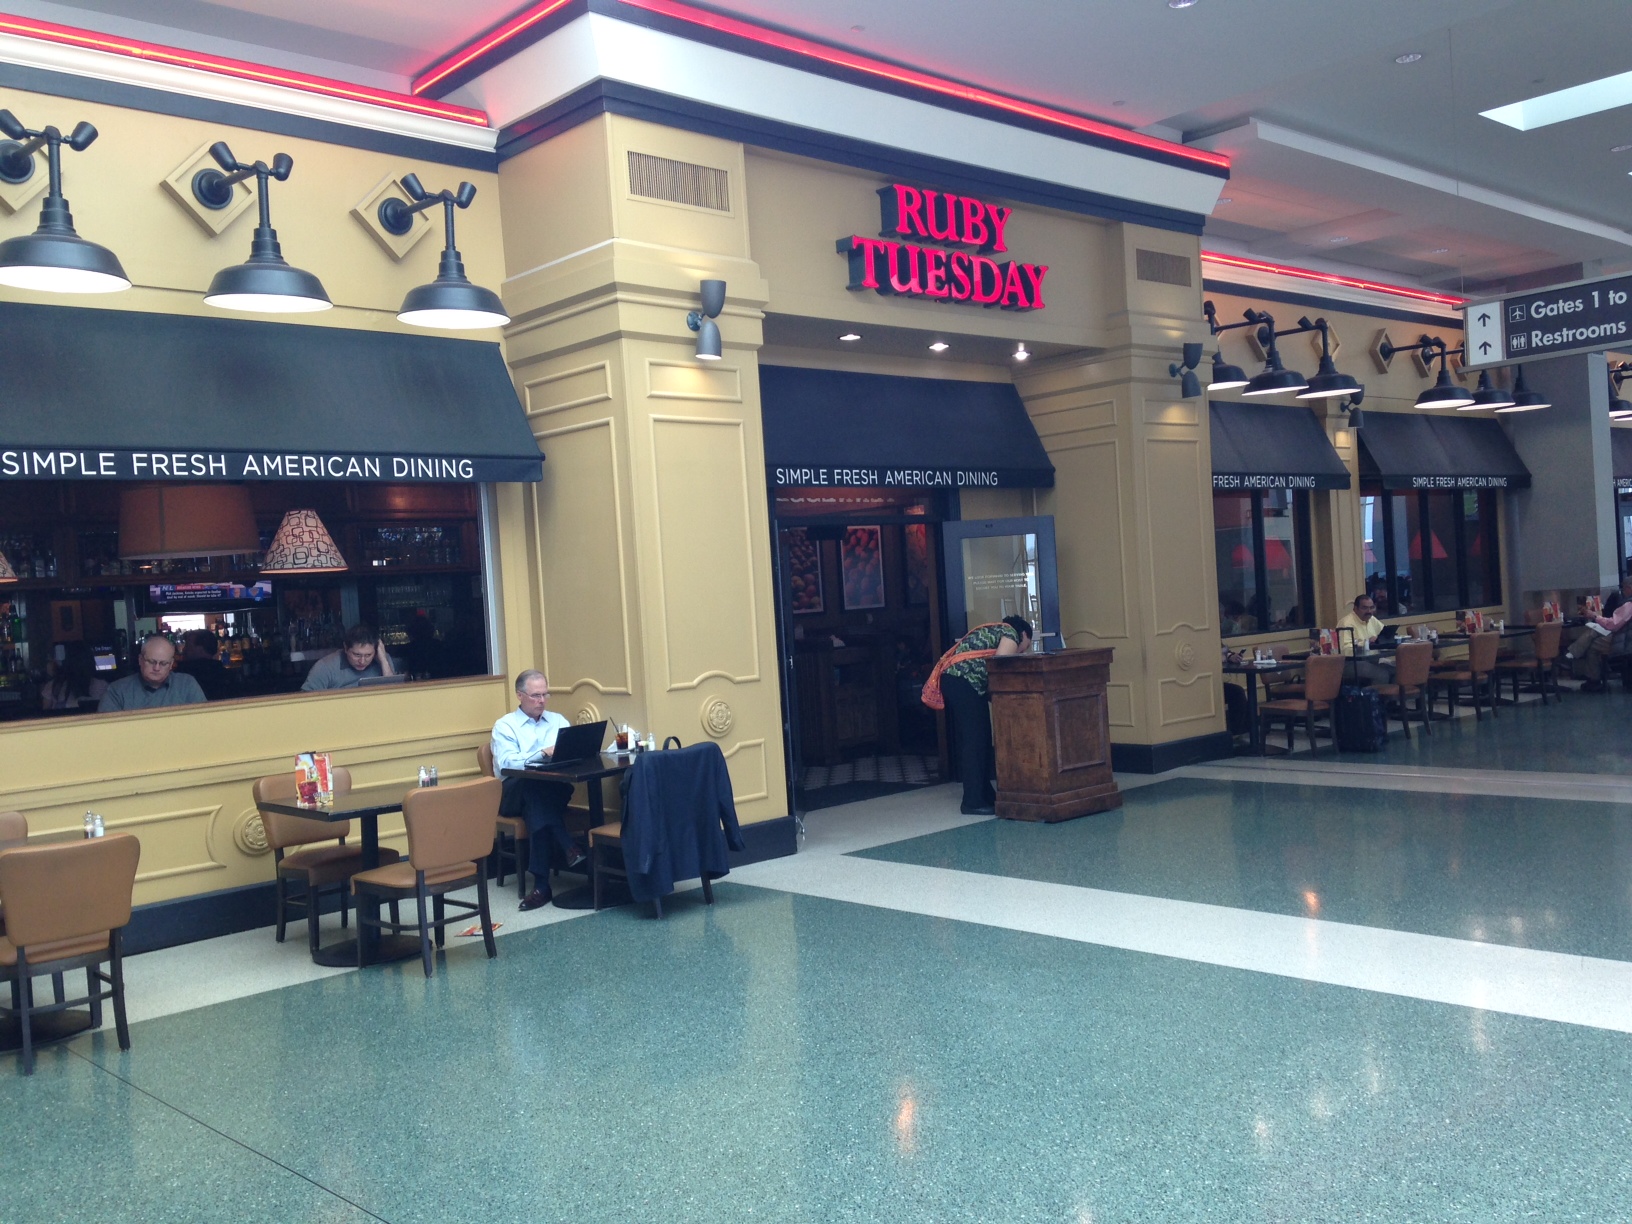 We had a snack at the Ruby Tuesday restaurant in the McGhee Tyson Airport in Knoxville.  Very convenient.